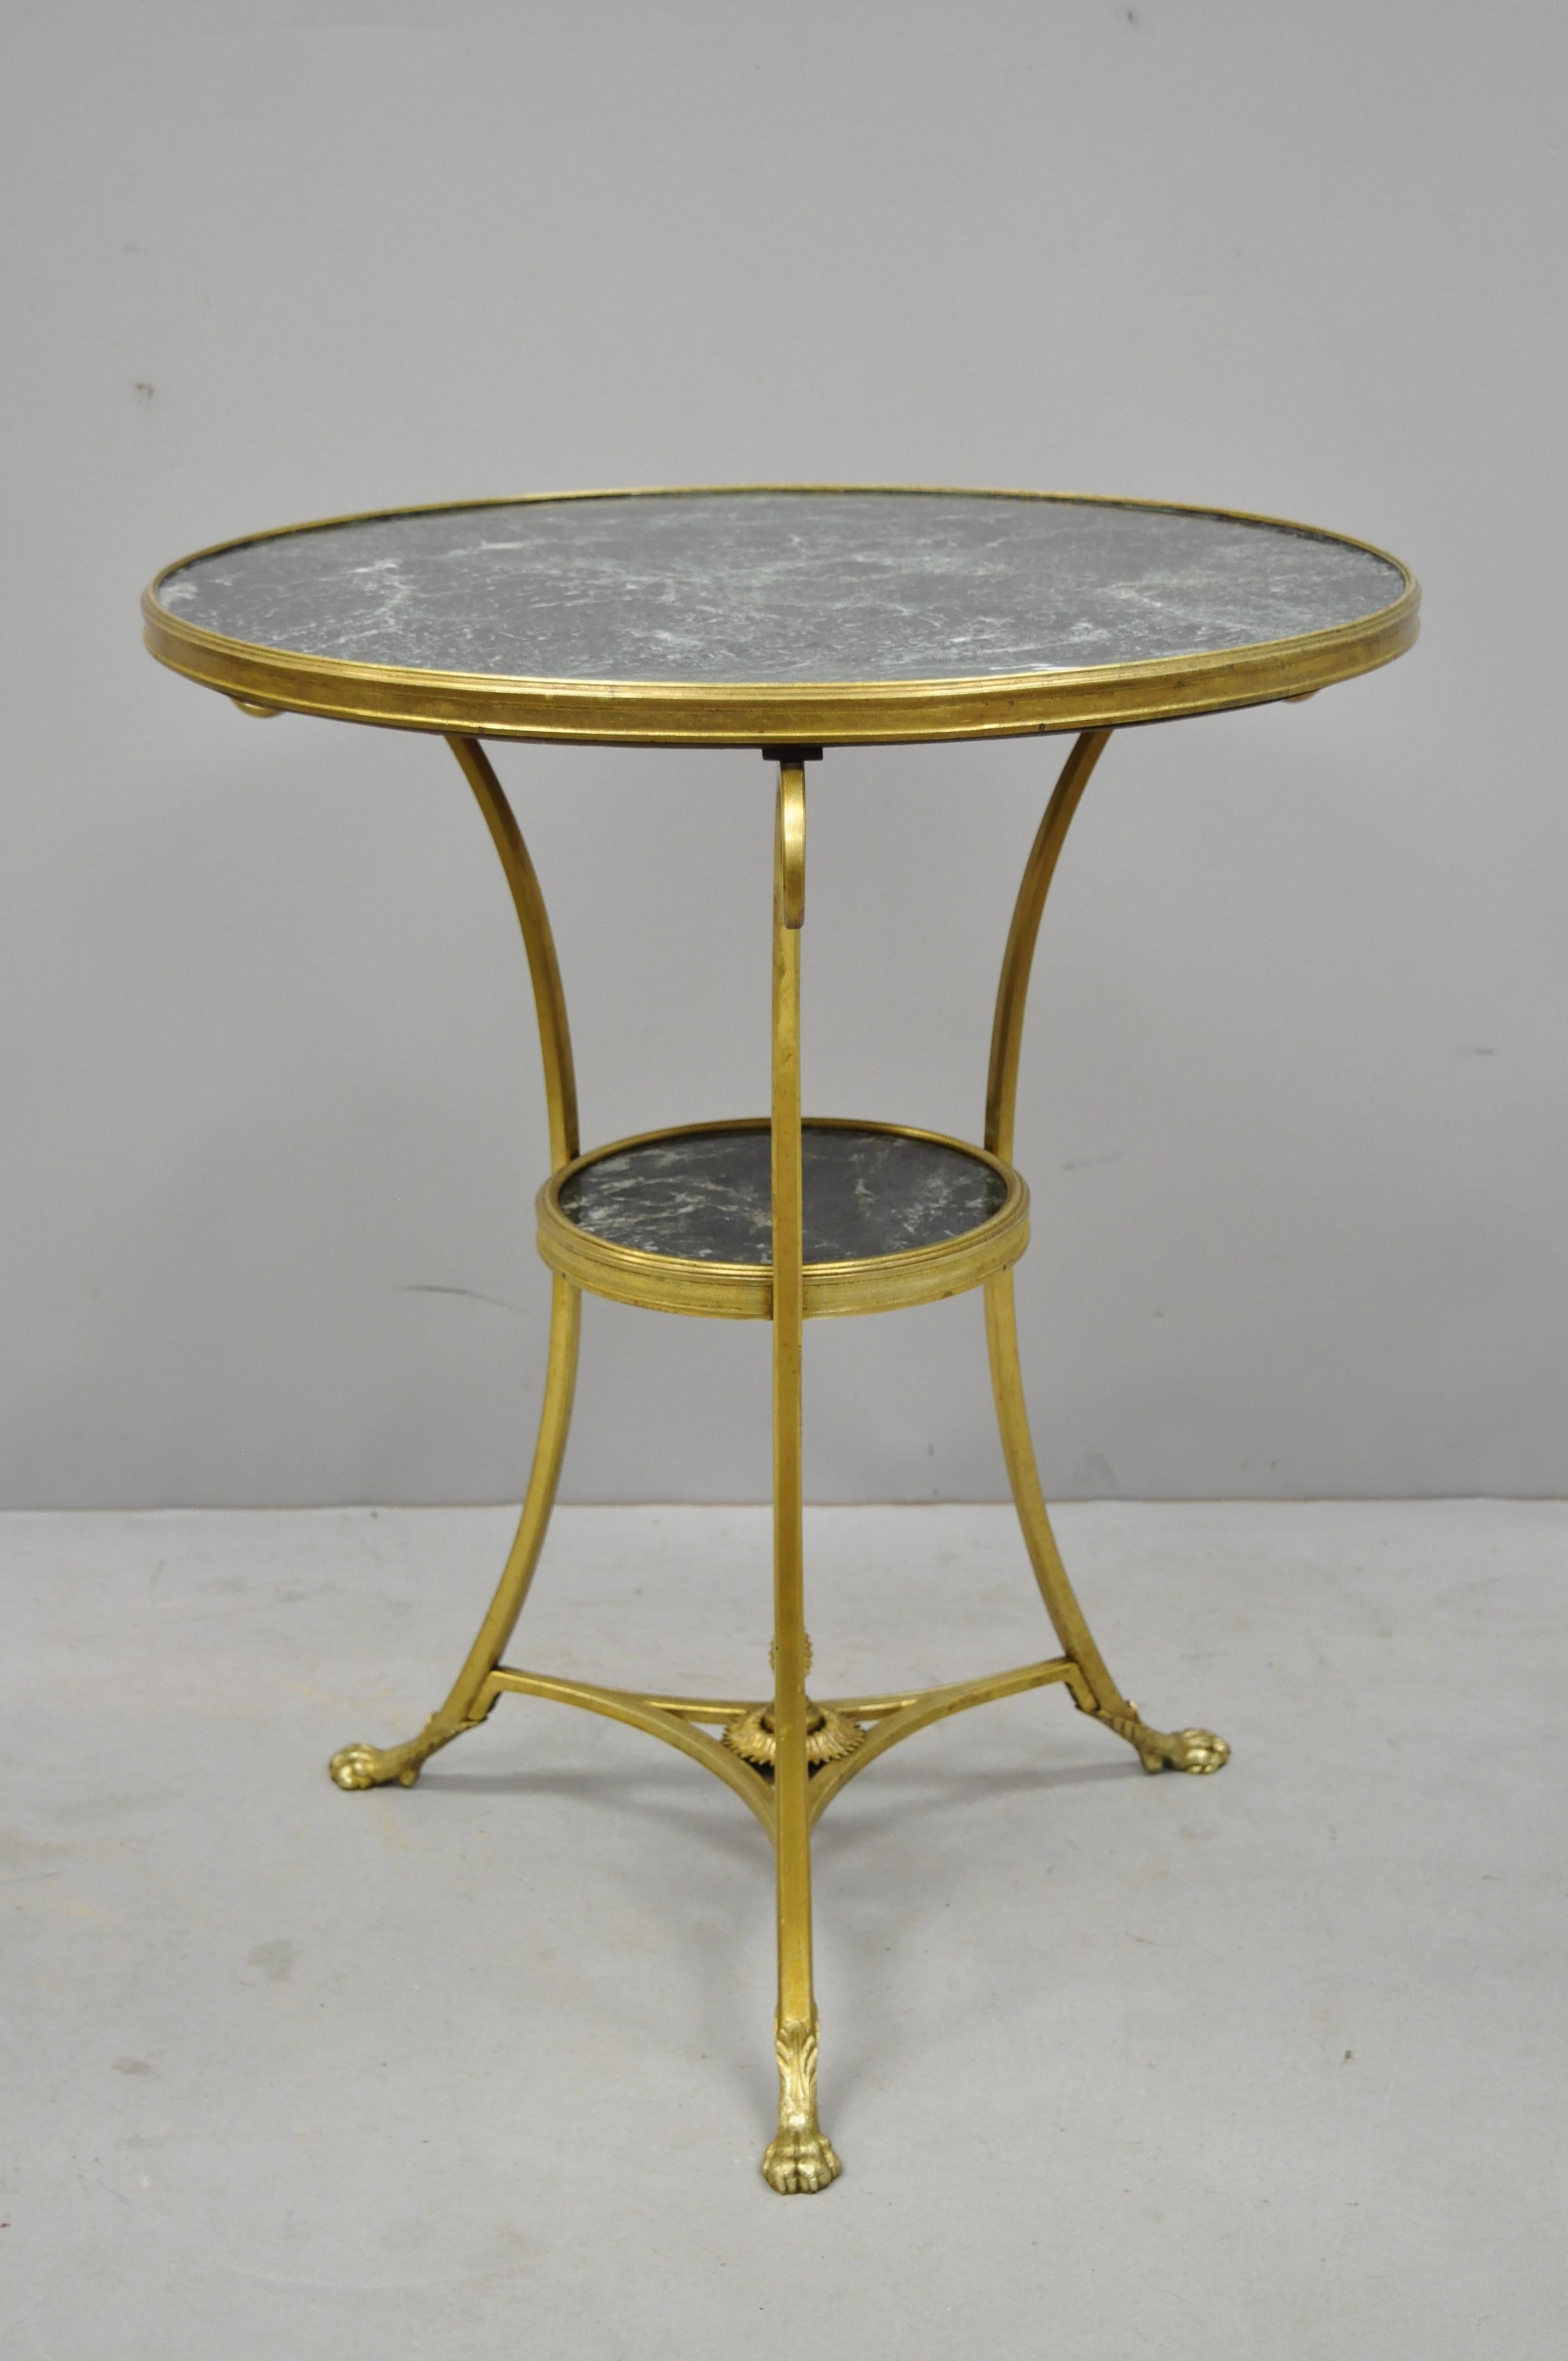 Early 20th century French bronze neoclassical round green marble top gueridon centre lamp table. Item features (2) green marble round tiers, bronze frame, claw feet, very nice antique item, quality craftsmanship, great style and form, circa early